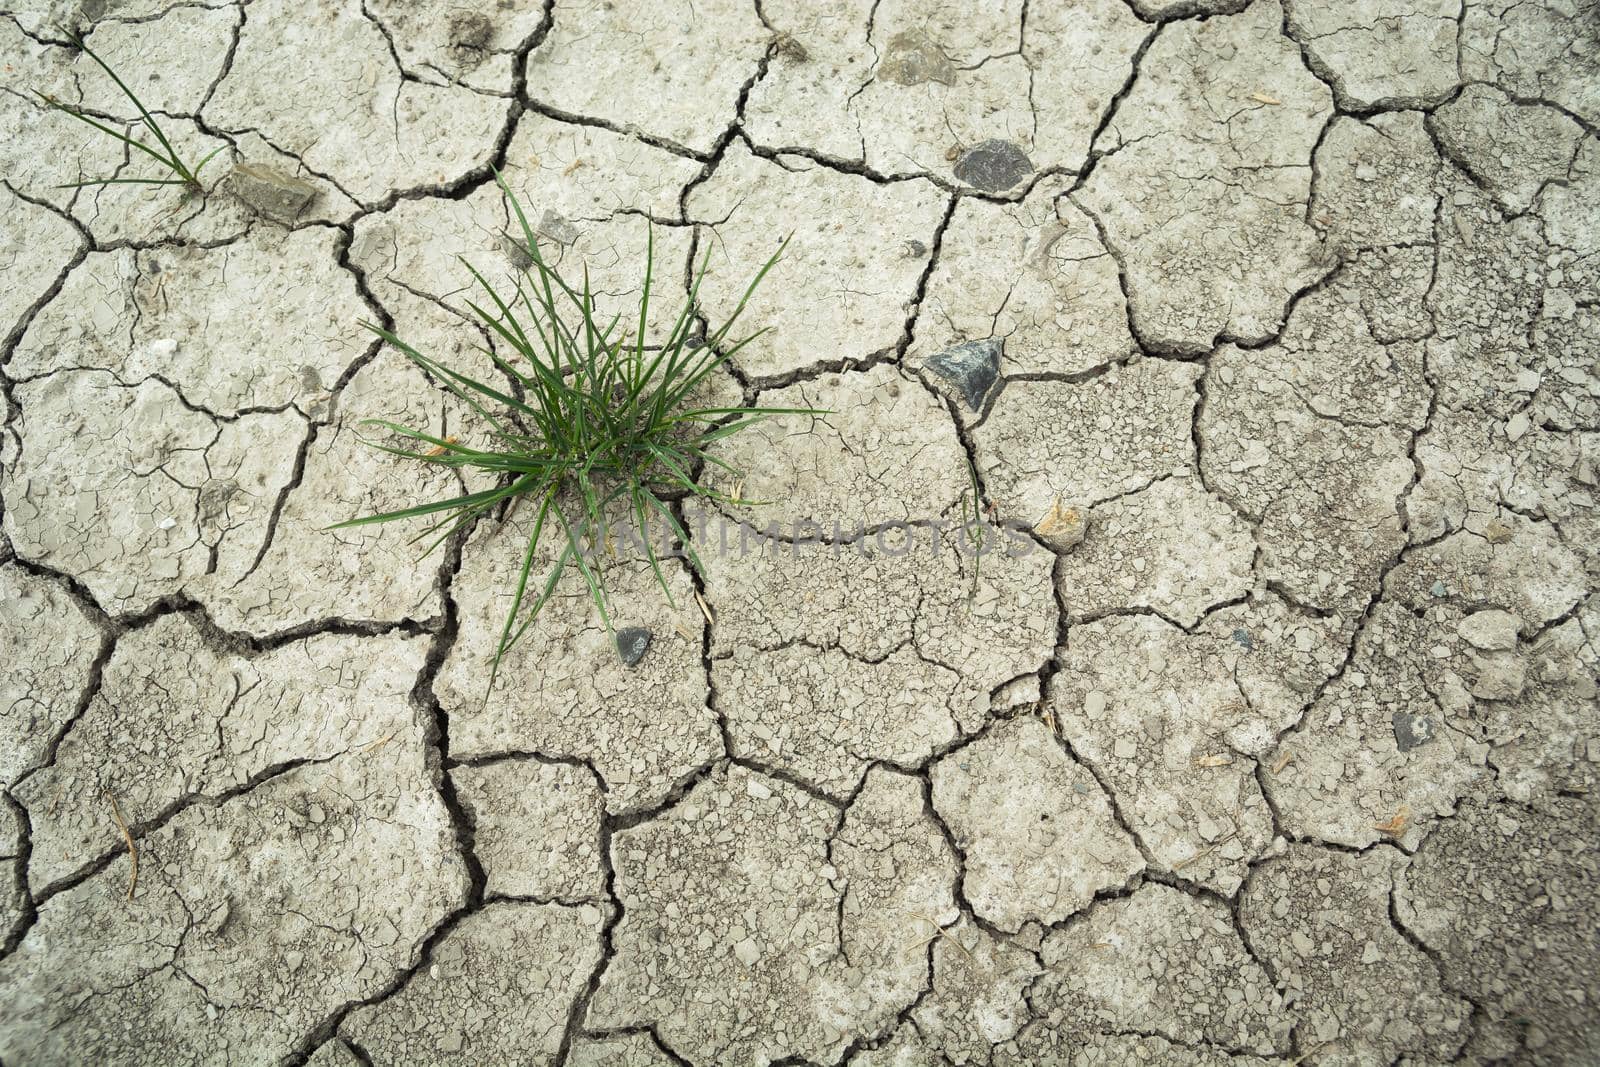 Clump of grass growing in dry and cracked soil by darekb22